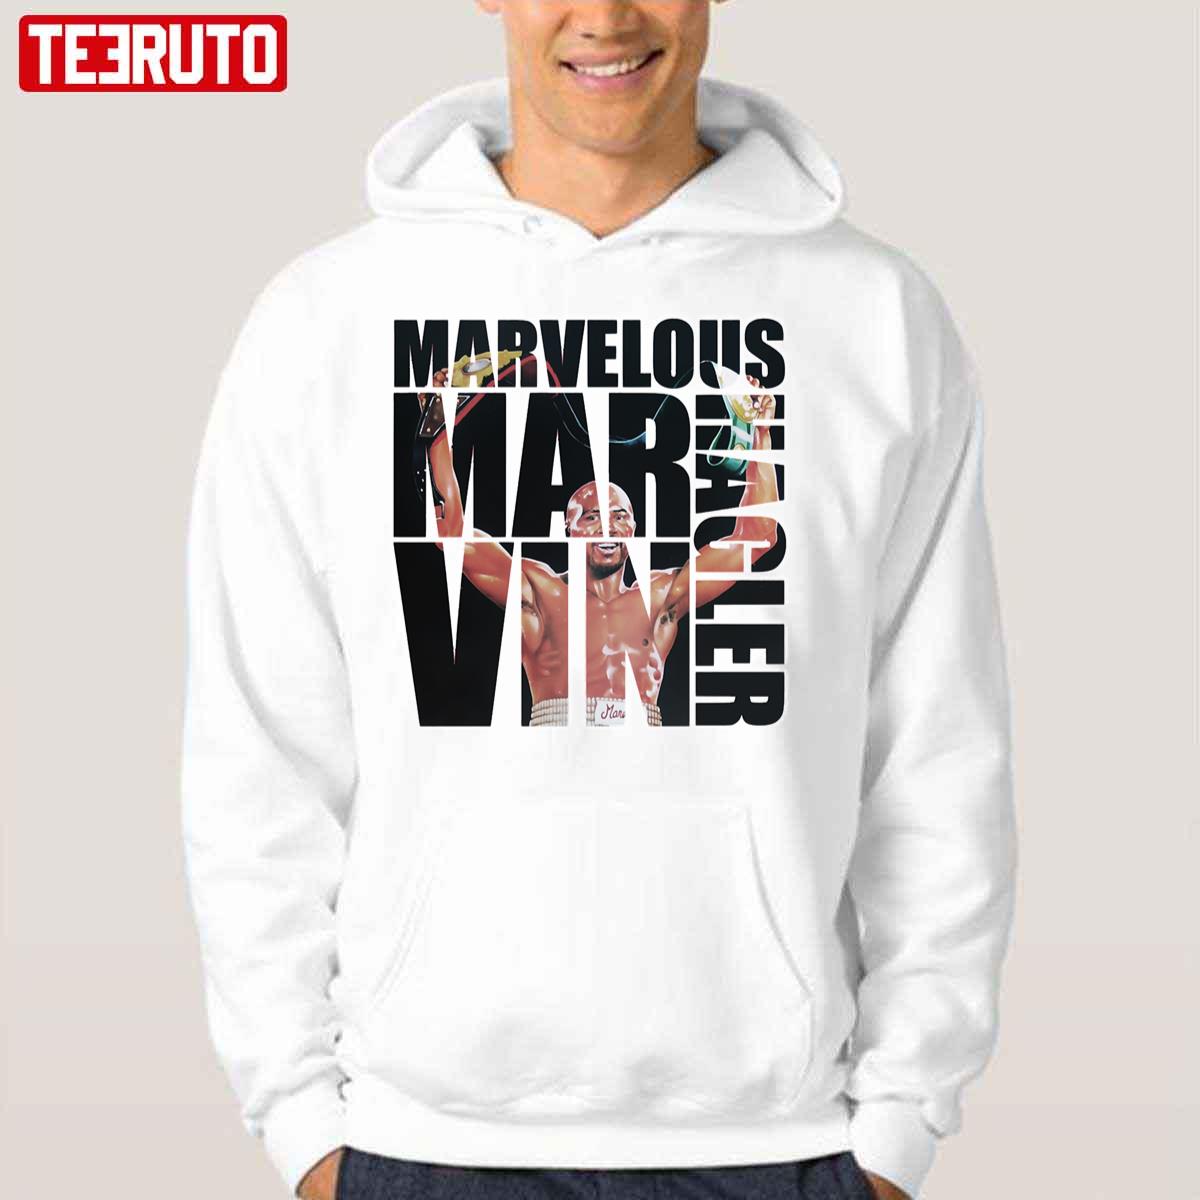 Boxing Champion The Strongest Marvelous Marvin Hagler Unisex Hoodie